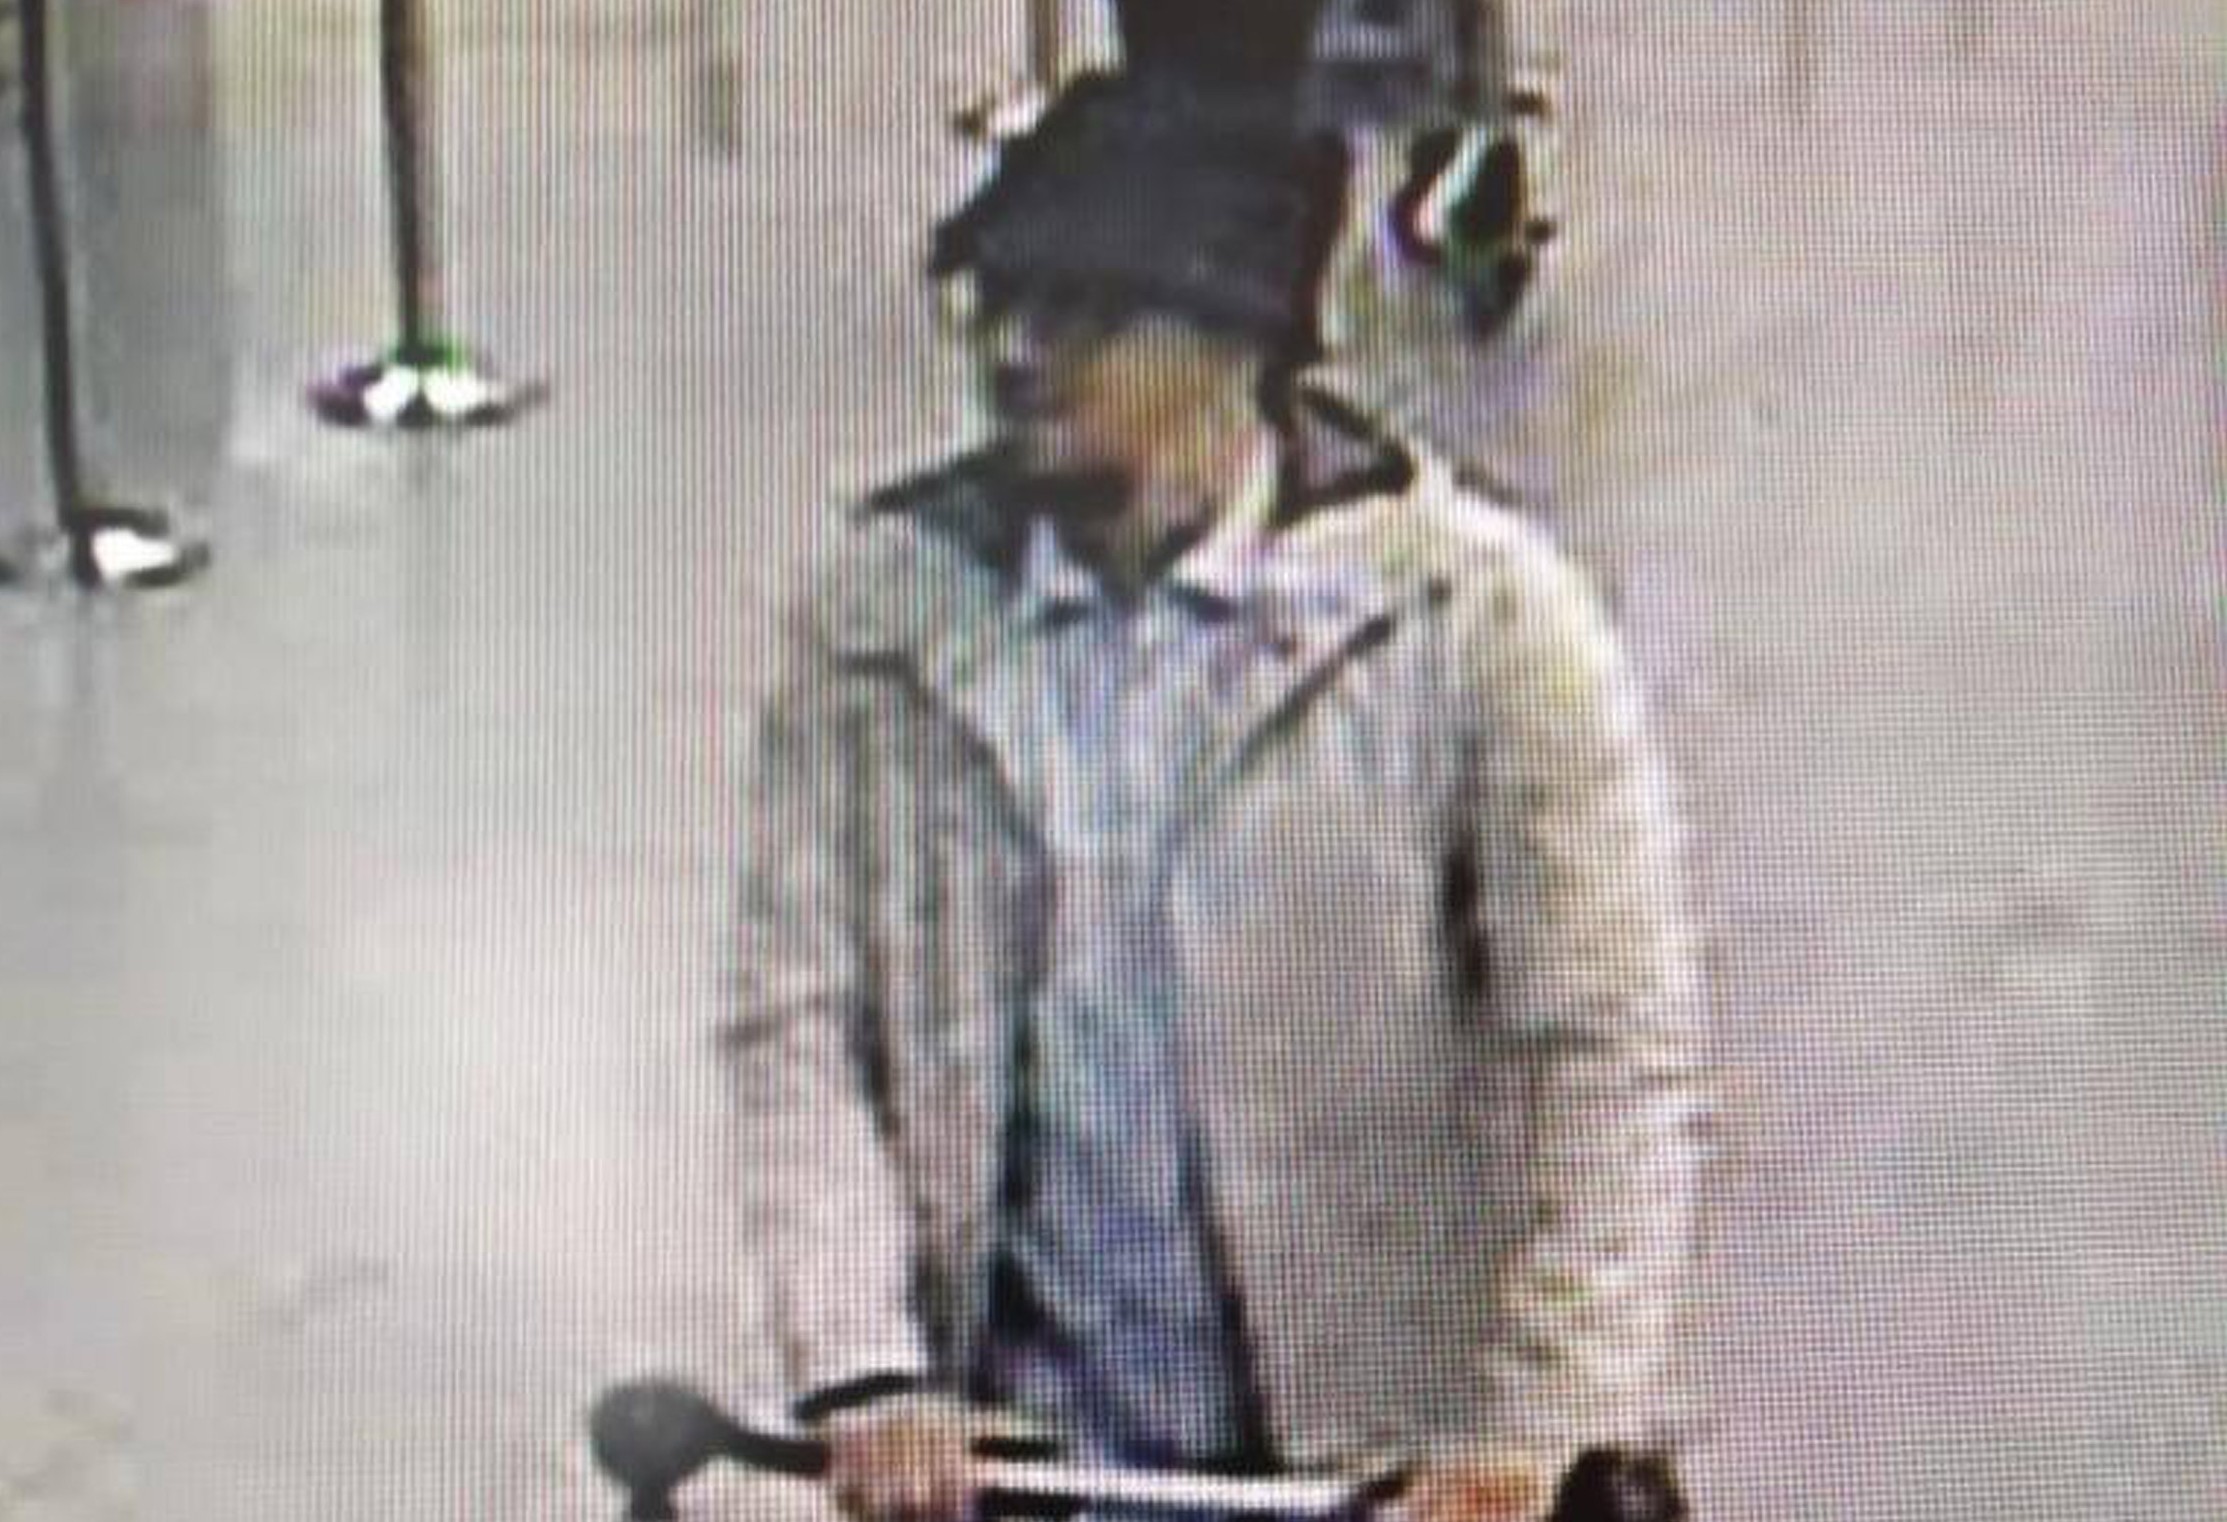 Brussels terrorist attacks suspect Belgian (Federal Police via Getty Images)